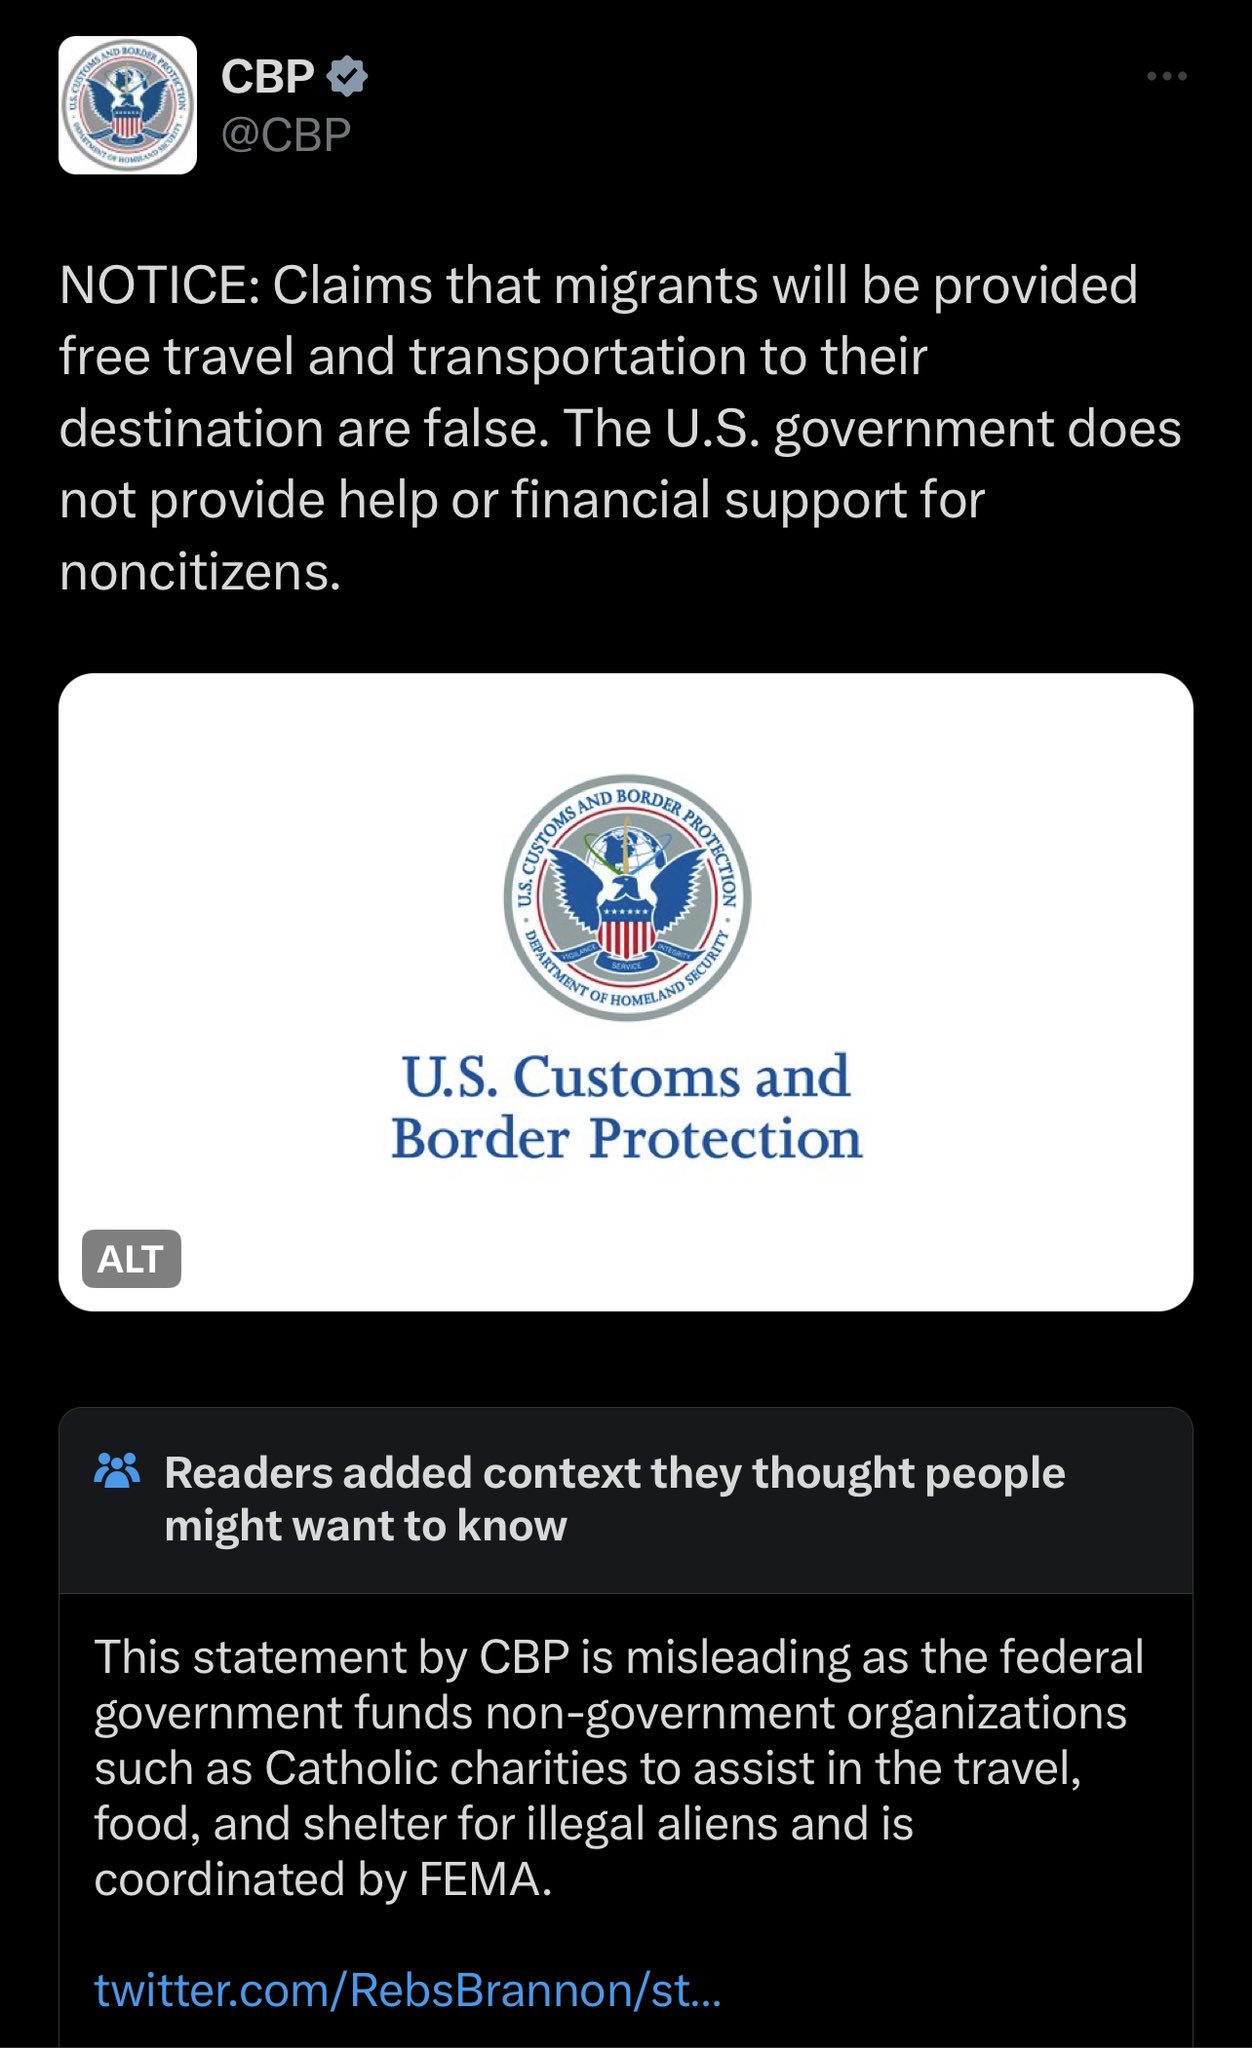 funny community notes - us customs and border protection - Stoms And Border Protecti Partment And Scut Hombwand Notice Claims that migrants will be provided free travel and transportation to their destination are false. The U.S. government does not provid